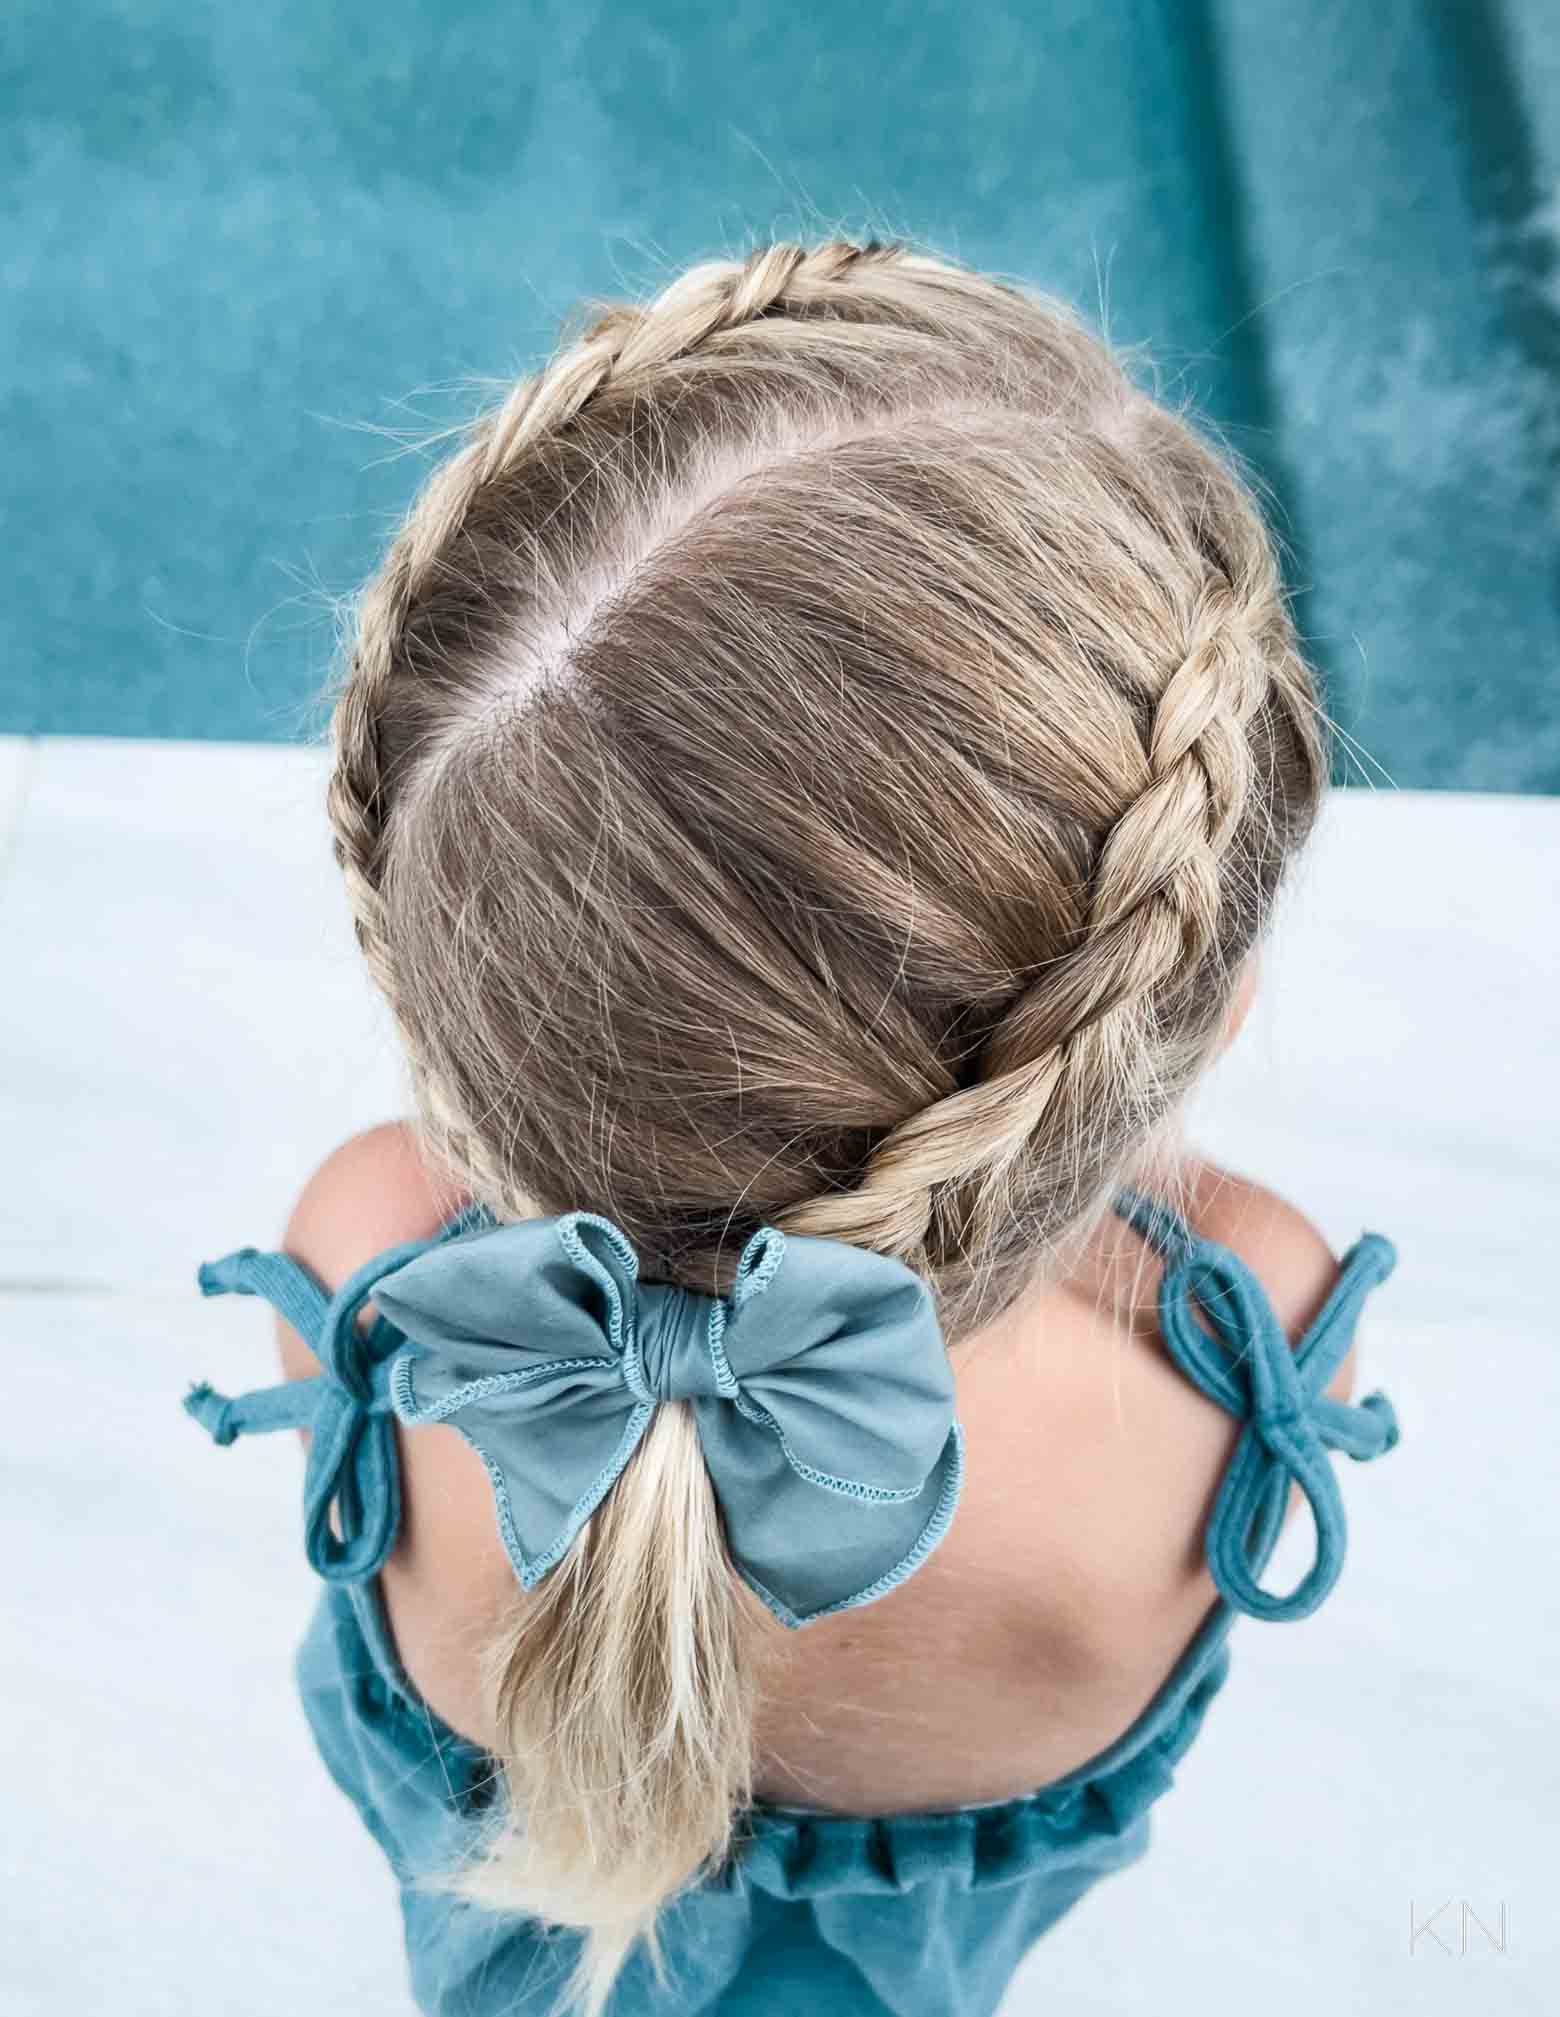 8 Hair Styles For Girls This Winter - Beauty By Brent-smartinvestplan.com